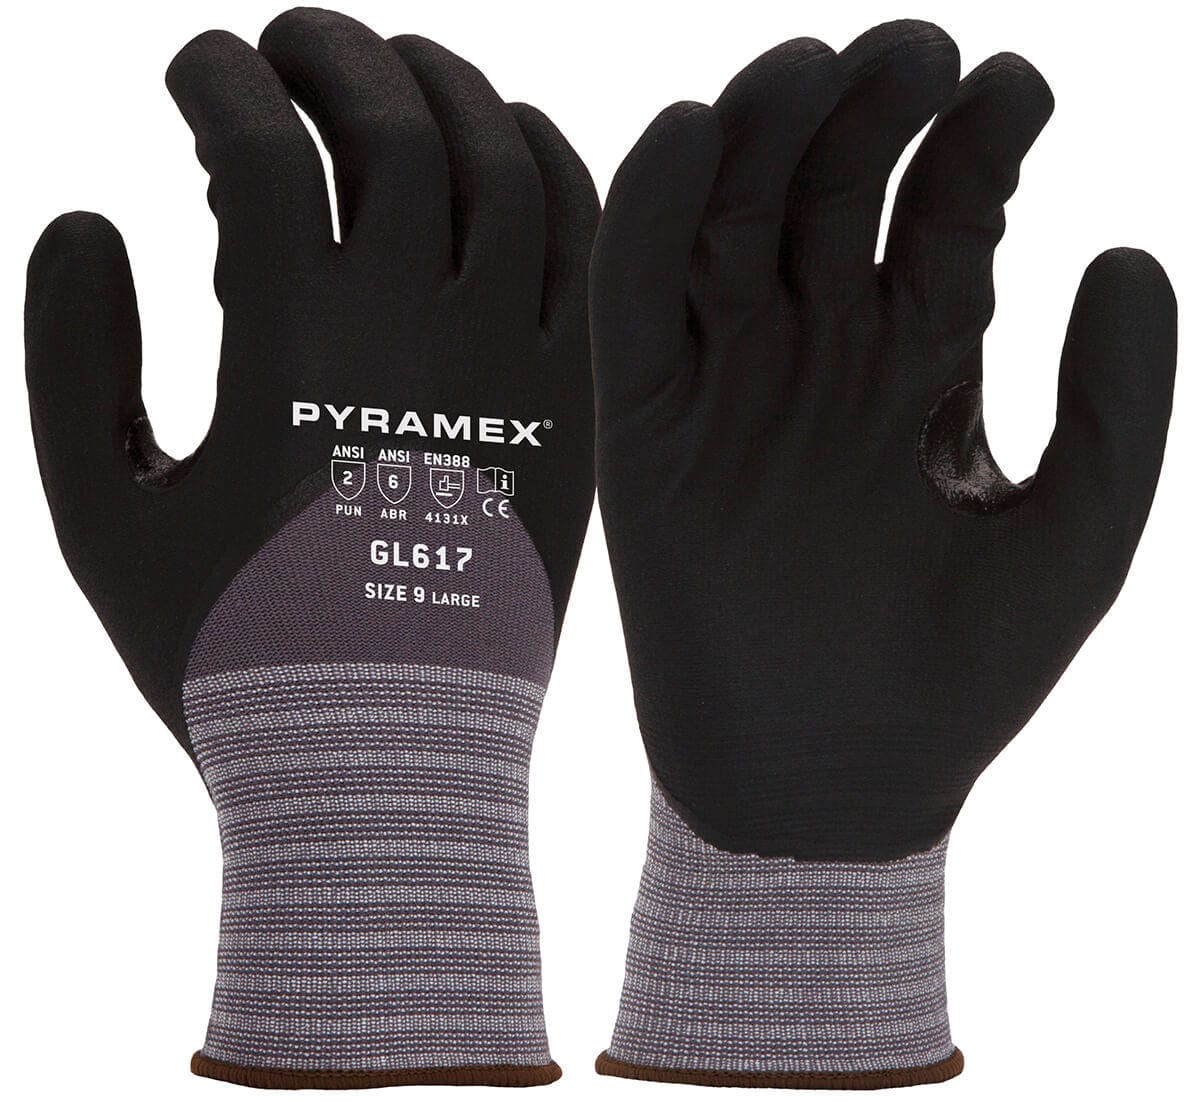 Pyramex GL617 Puncture-Resistant Nitrile Foam Dipped Gloves GL617